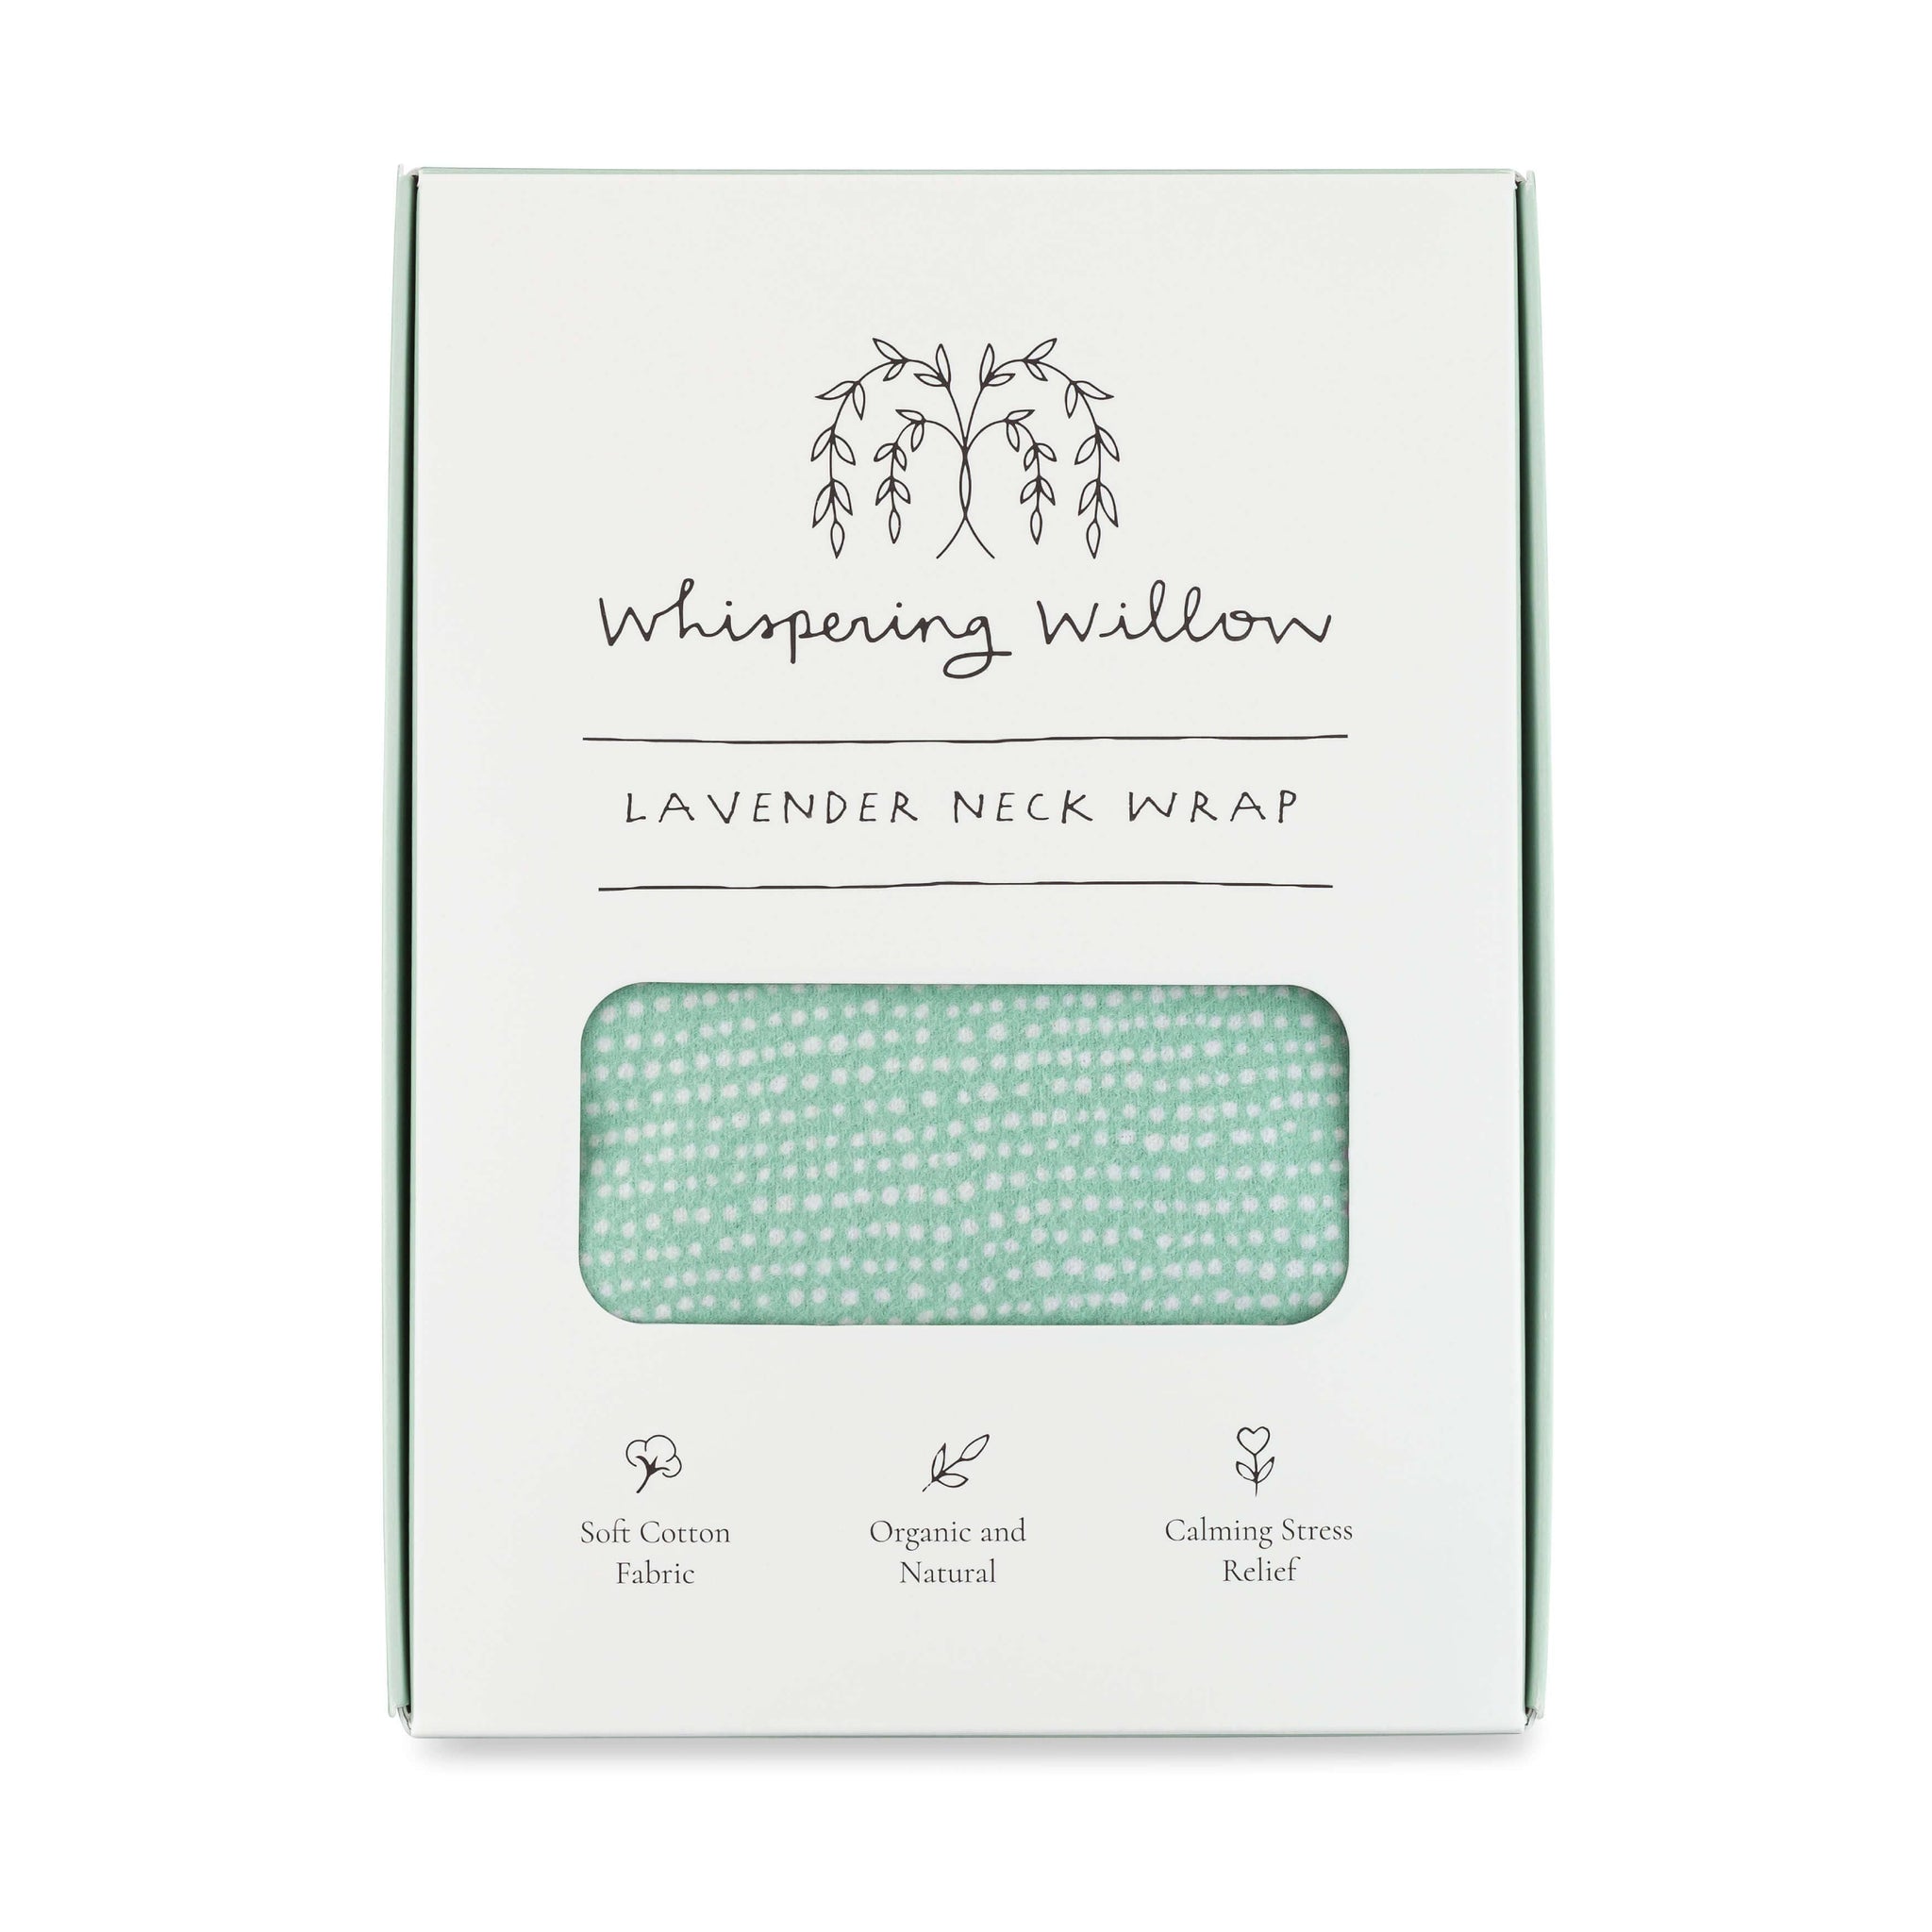 Whispering Willow - Neck Wrap, Lavender - Cool Mint - Boxed